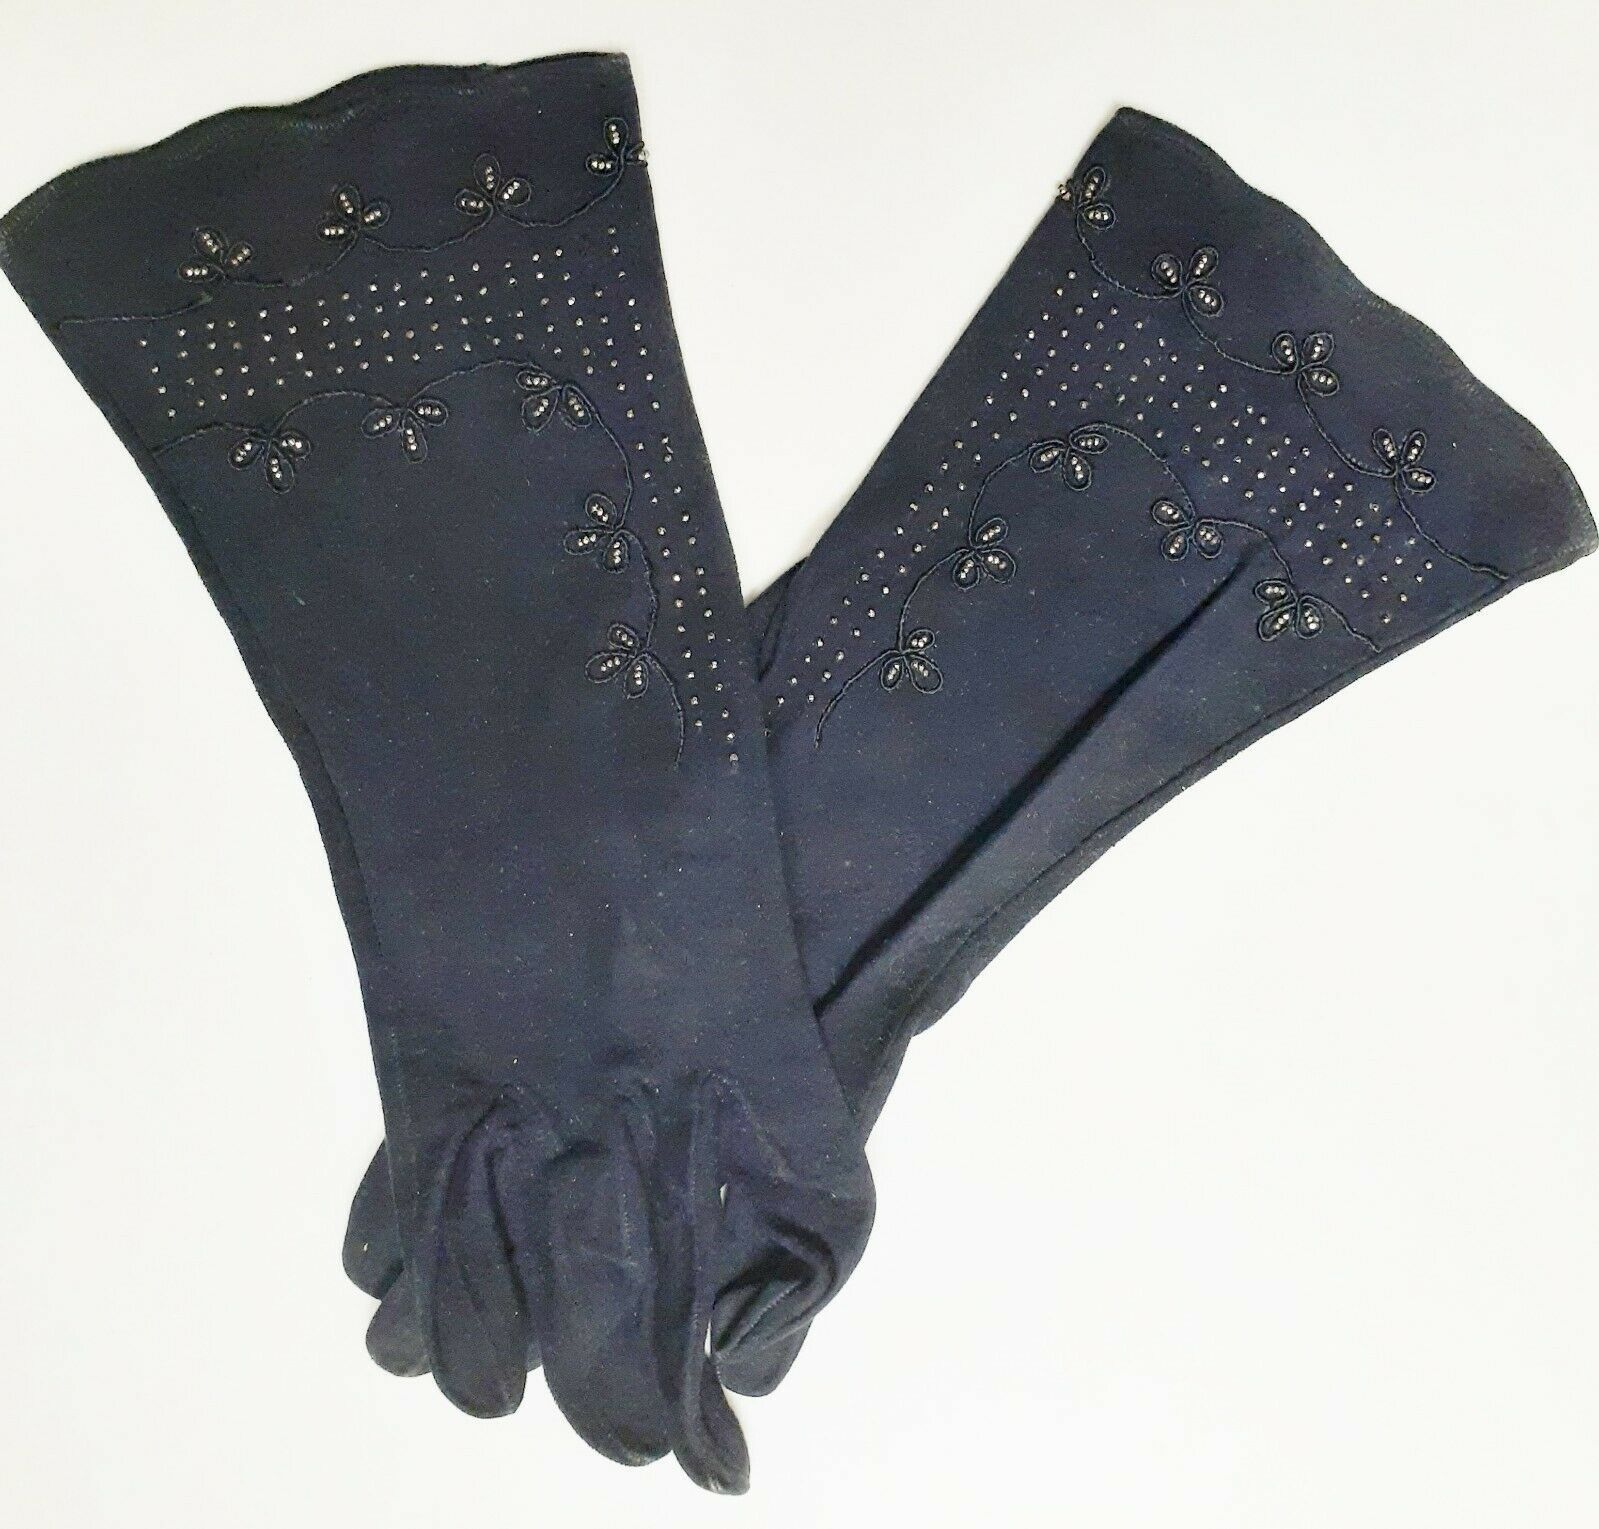 Primary image for Vintage GANTS PARIS Hand Beaded Suede Leather Gloves Scallop Edge Black 6 3/4